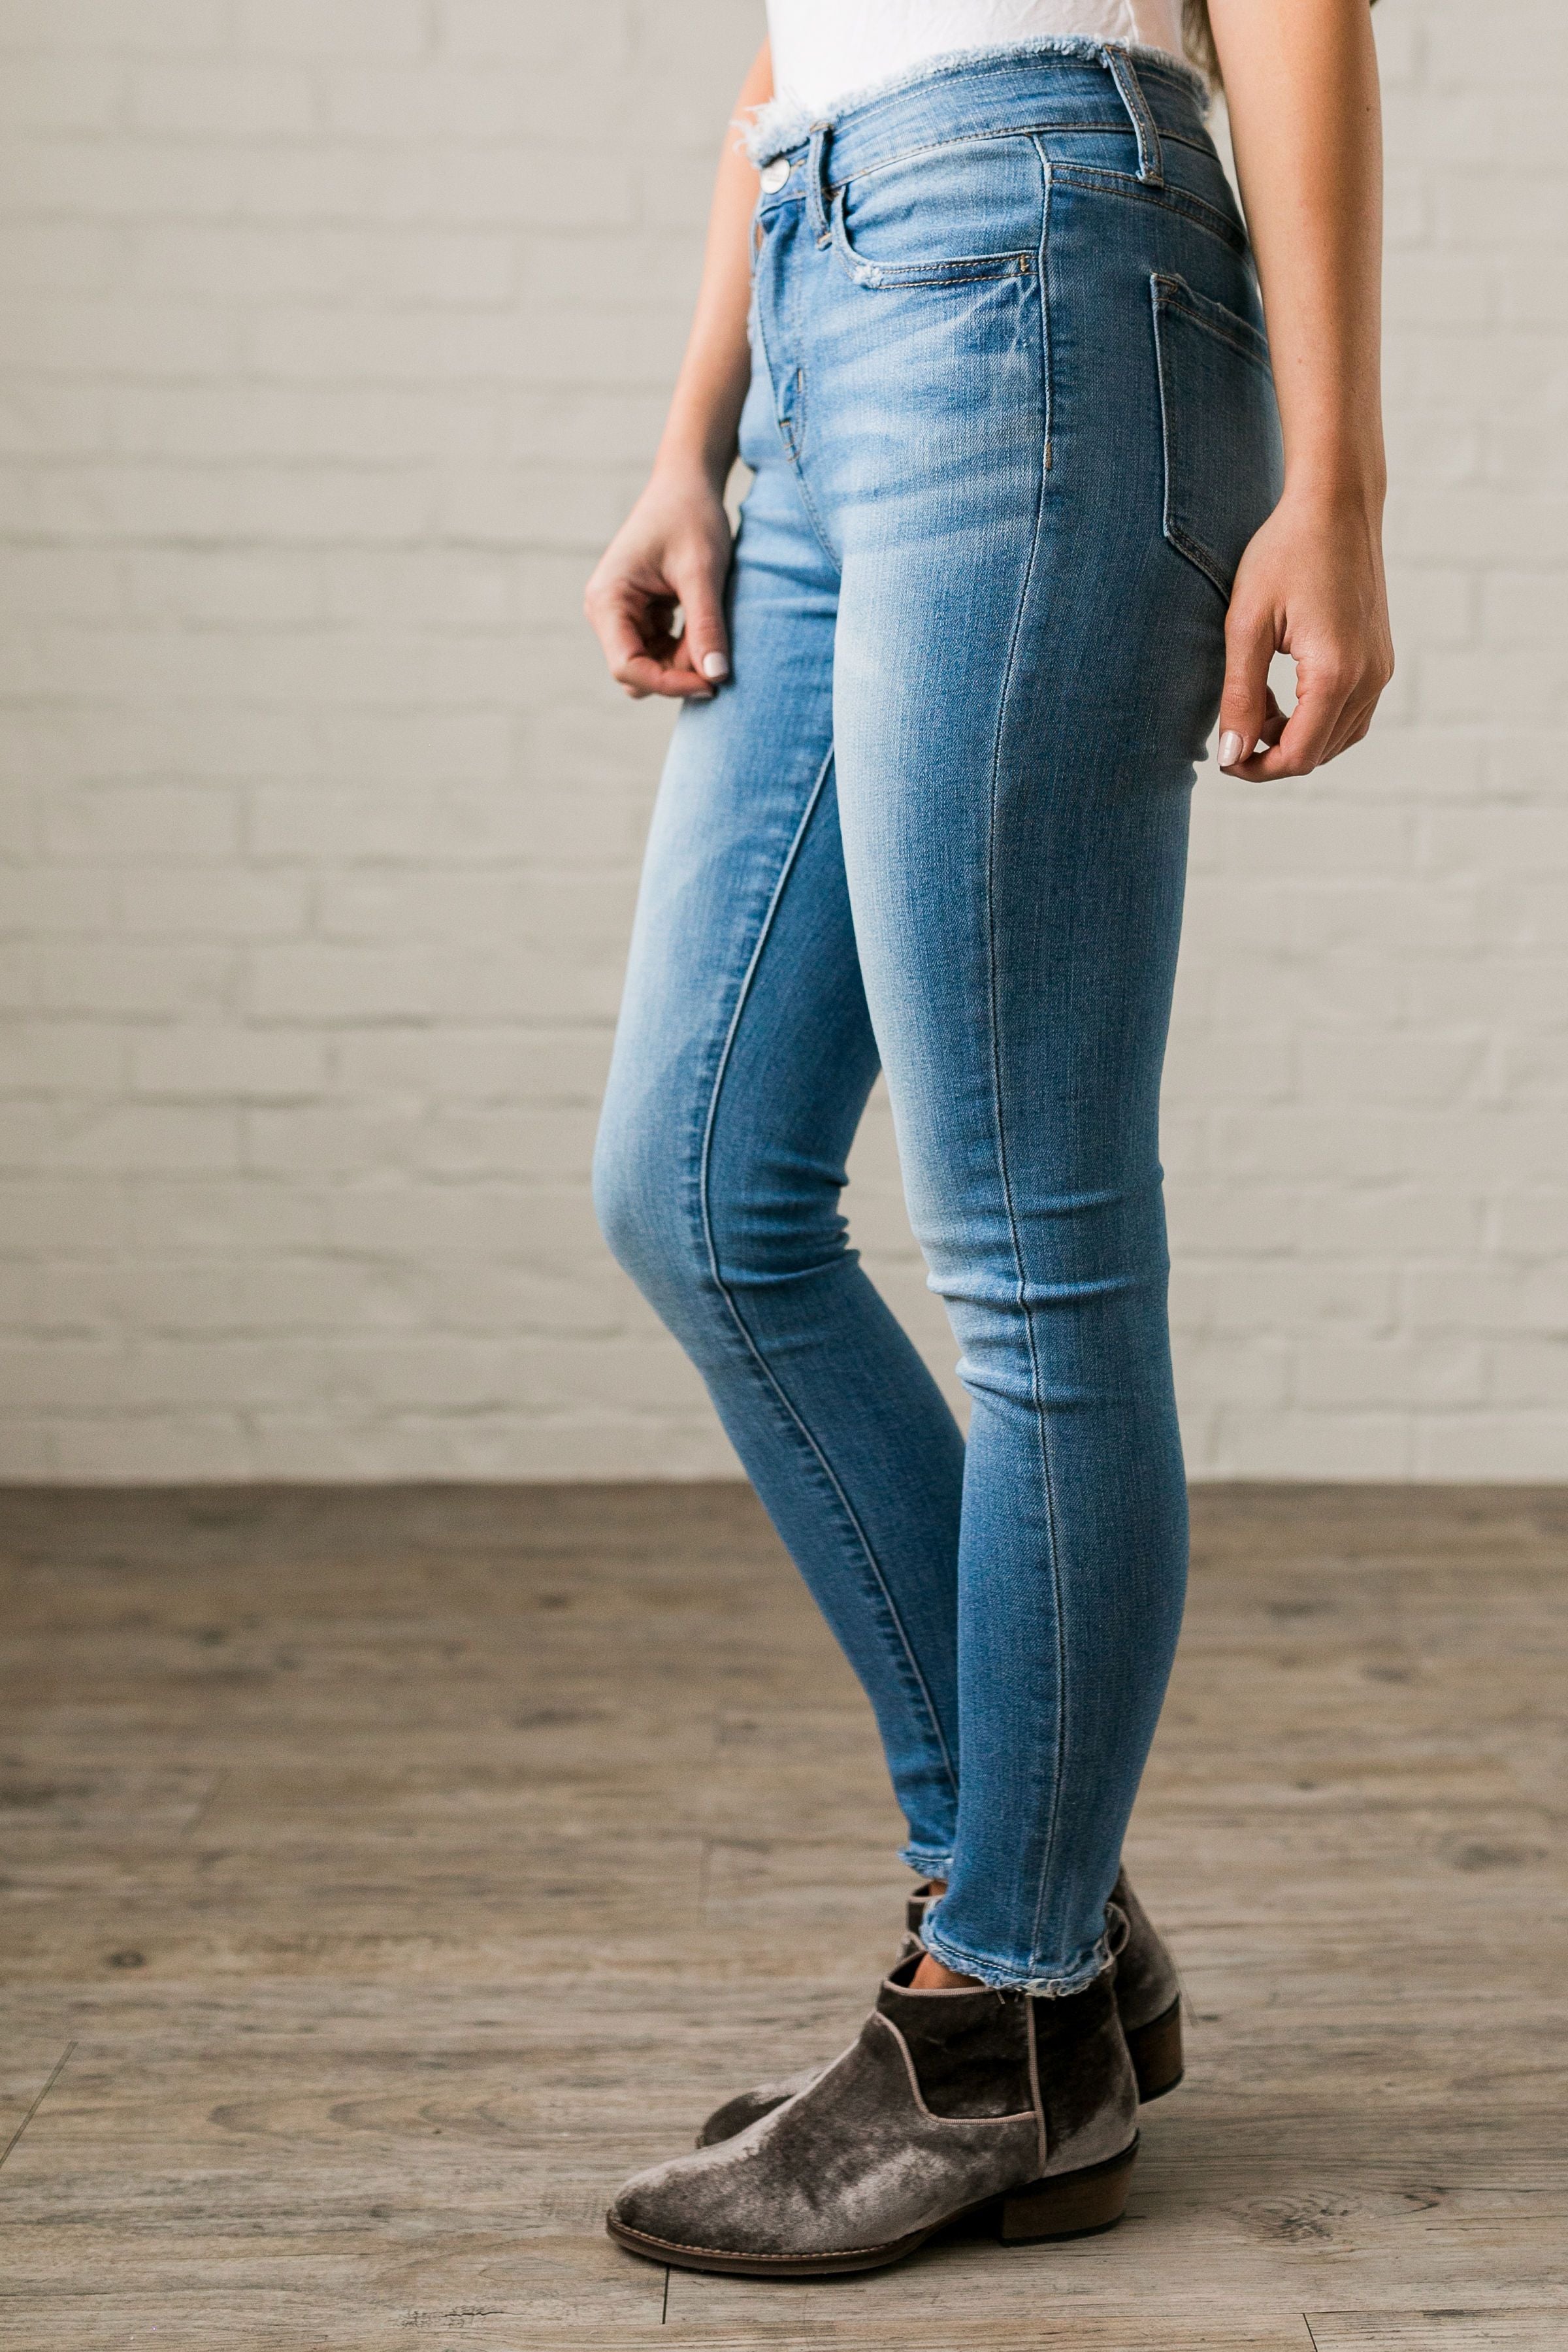 Fringed Waist Skinny Jeans - ALL SALES FINAL